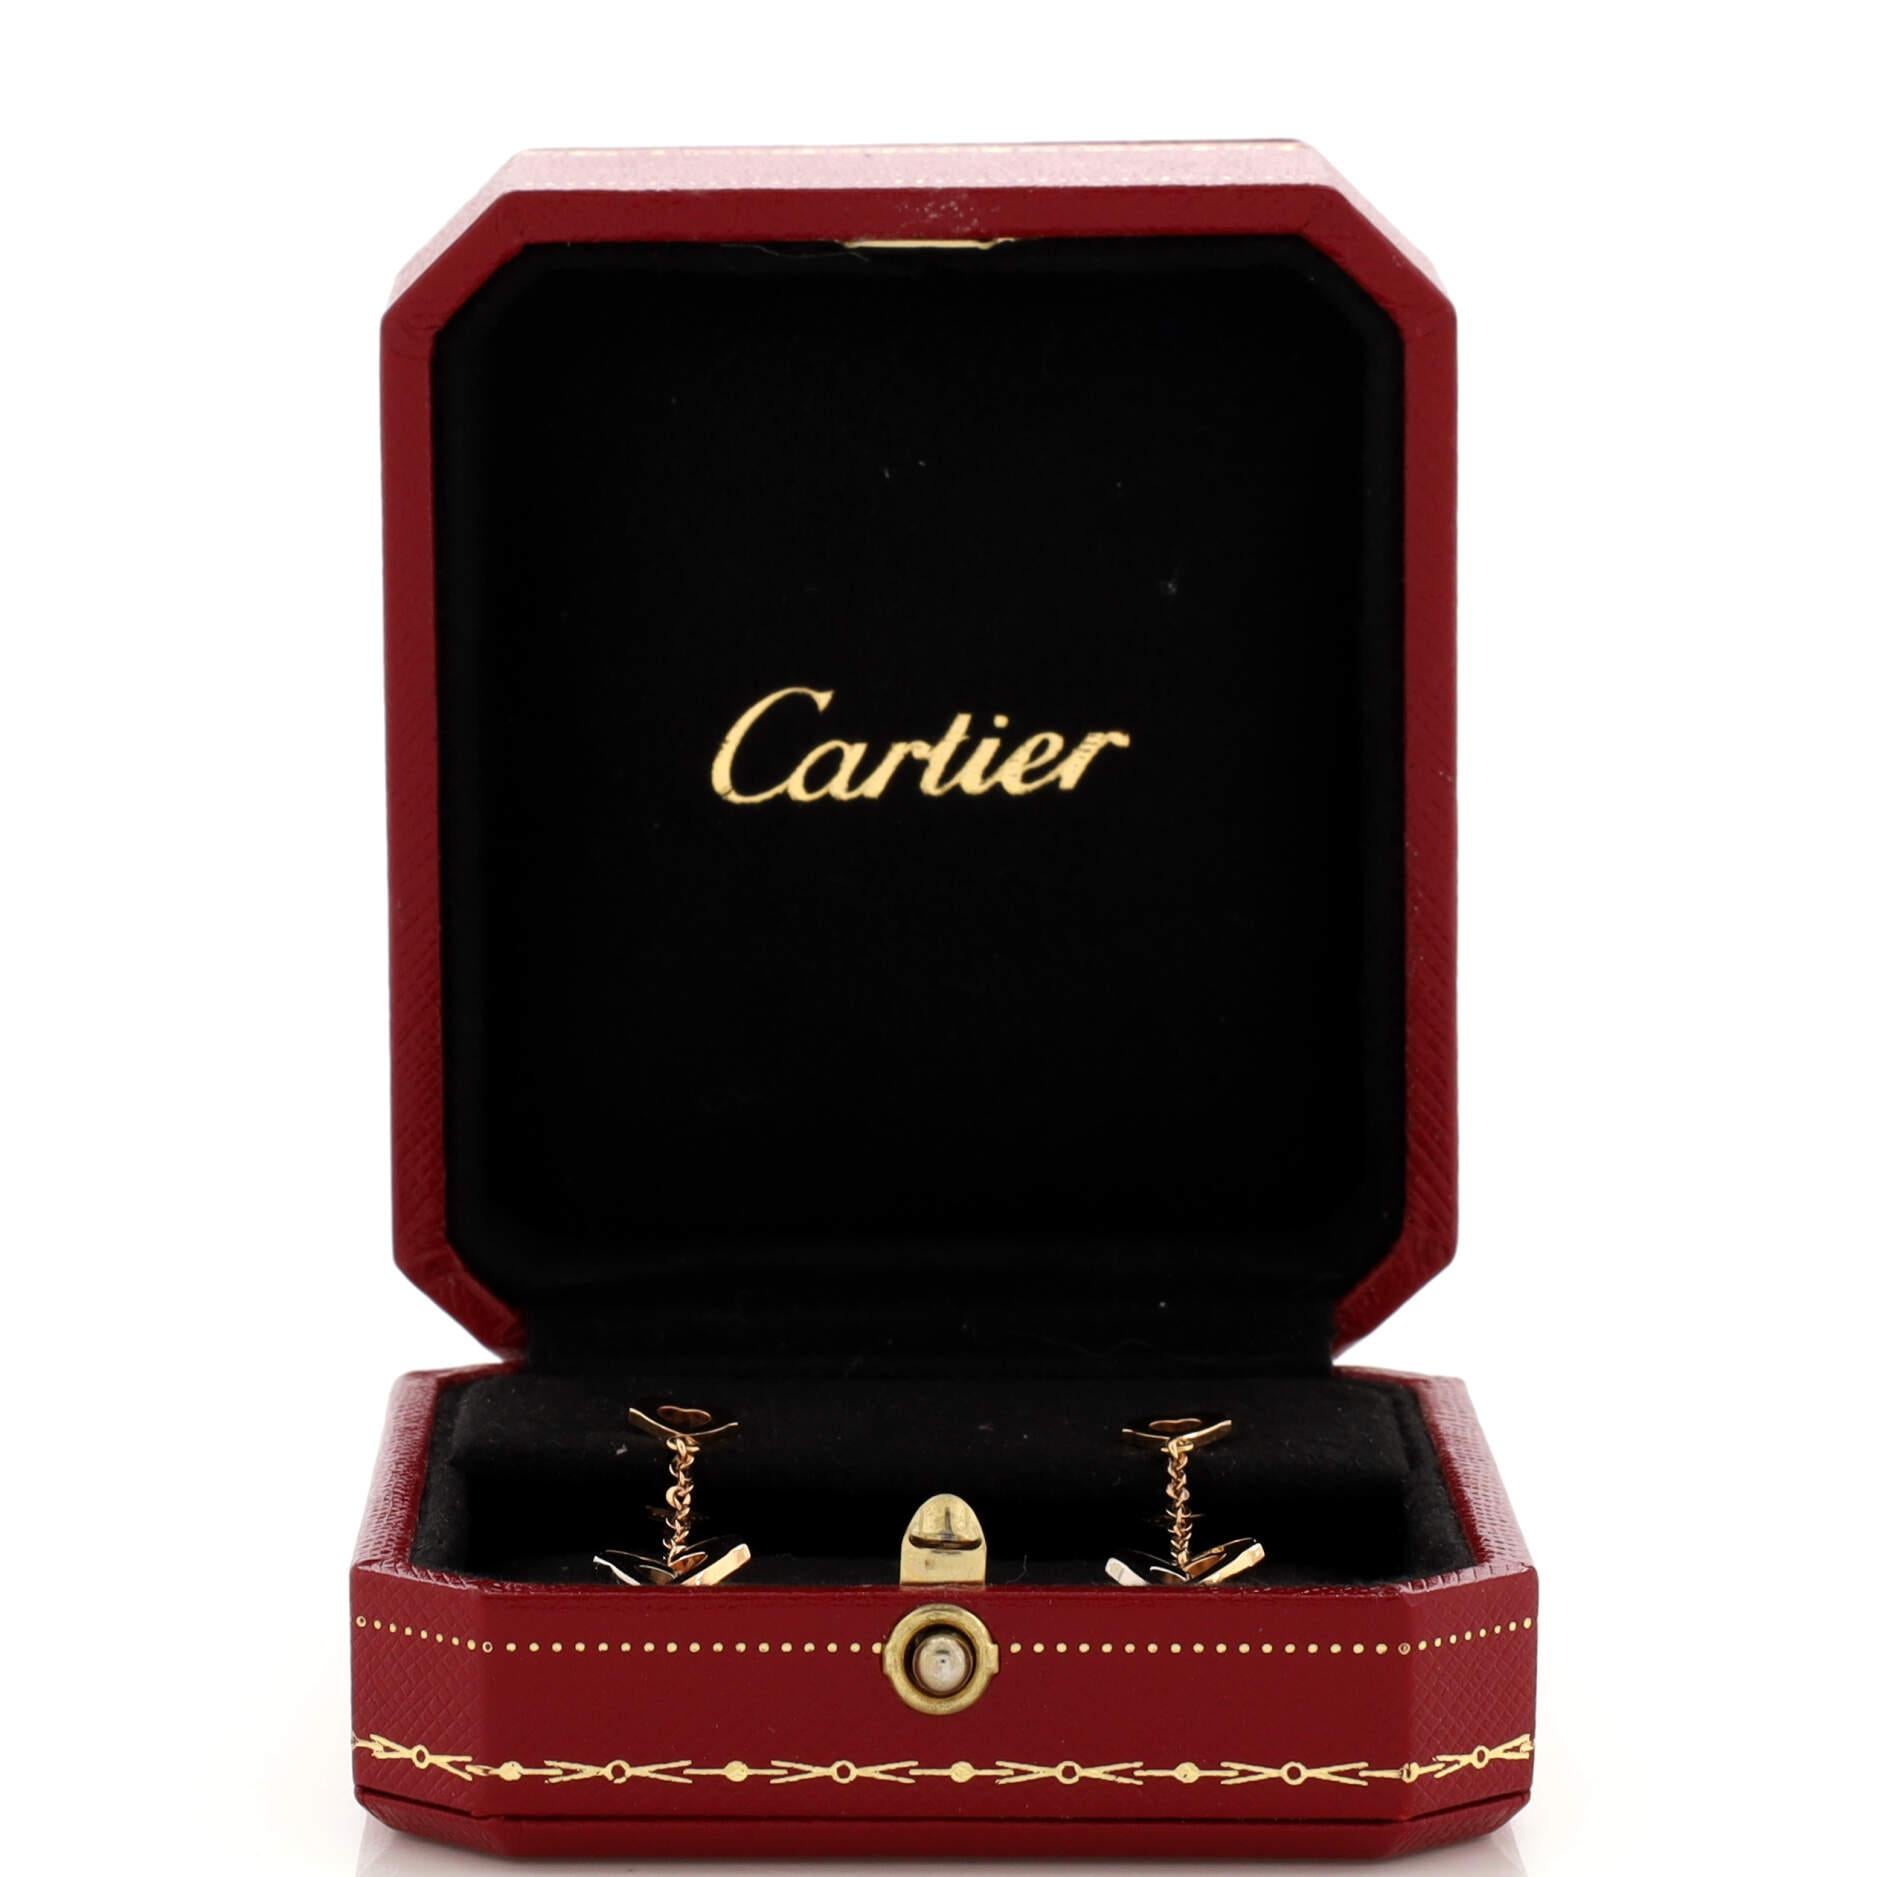 Condition: Great. Minor wear throughout.
Accessories: No Accessories
Measurements: Height/Length: 38.40 mm, Width: 7.00 mm
Designer: Cartier
Model: Double Heart Drop Earrings 18K Rose Gold with 18K White Gold
Exterior Color: Tricolor Gold
Item